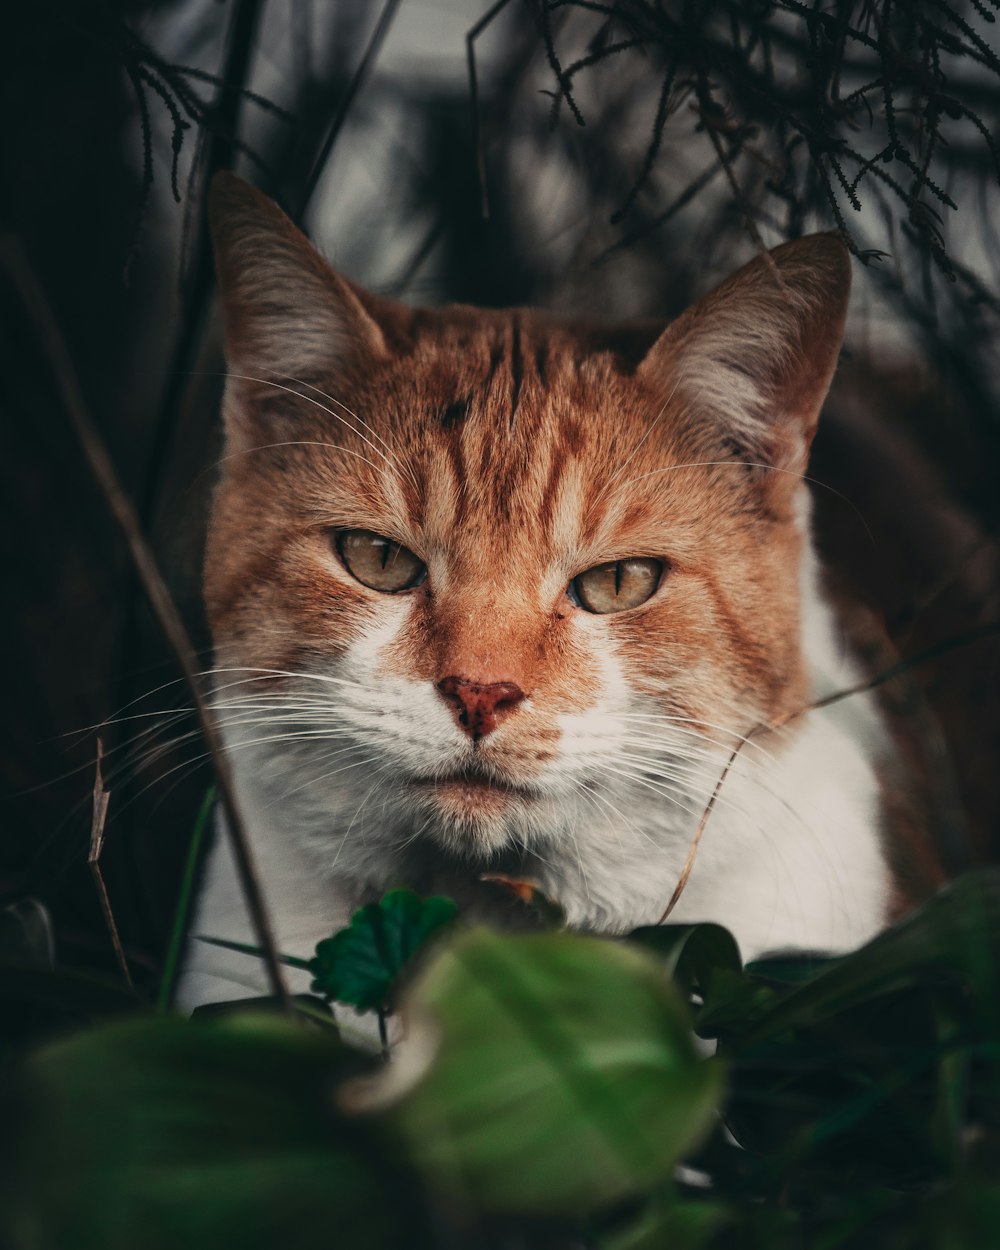 a close up of a cat near some plants